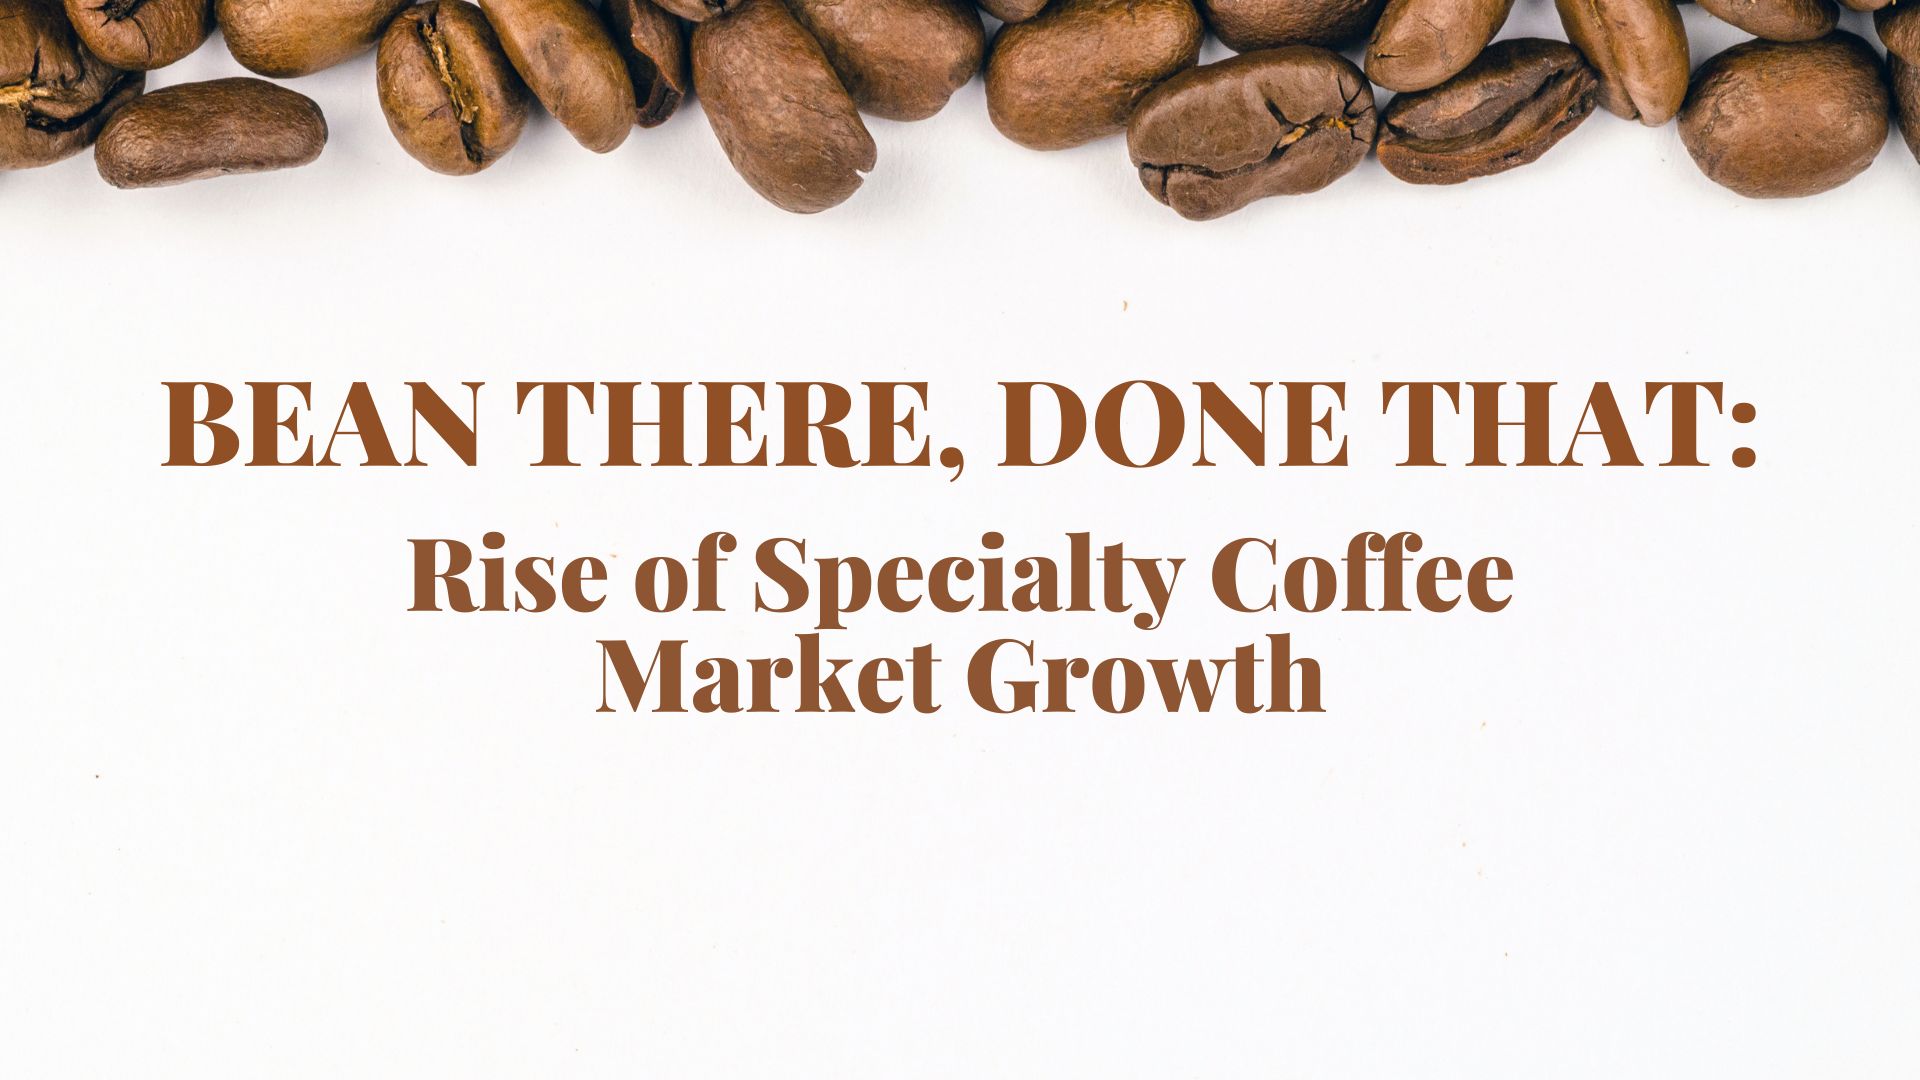 There is significant growth in the specialty coffee market